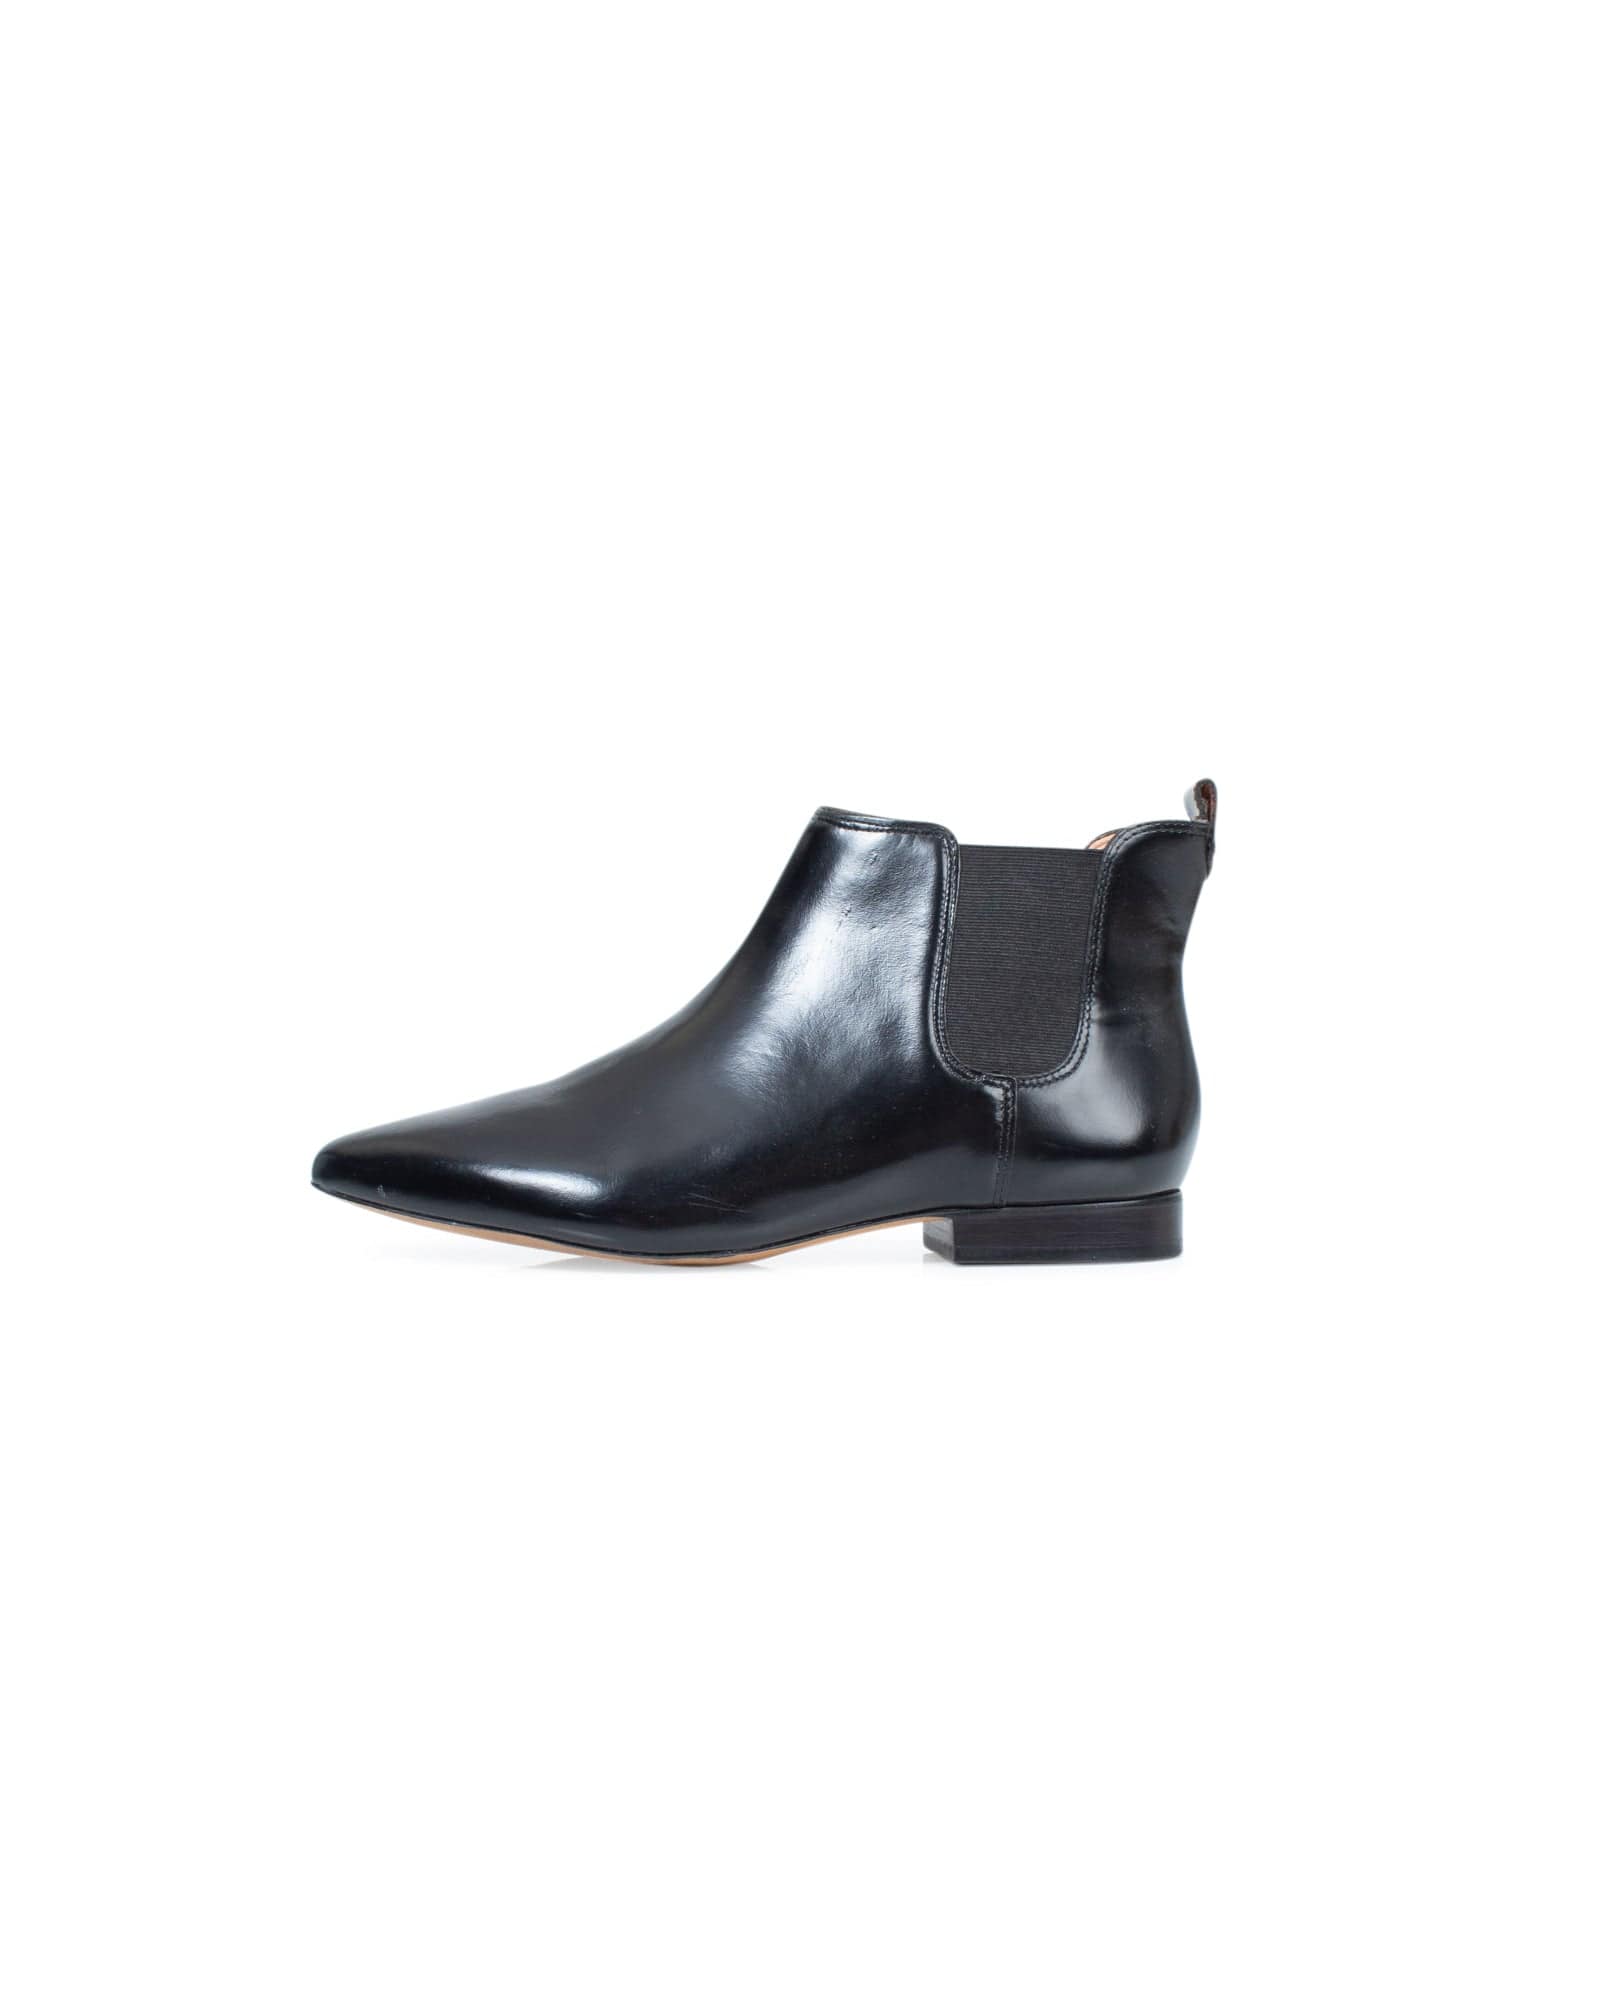 Black Pointed Toe Ankle Boots - The Revury